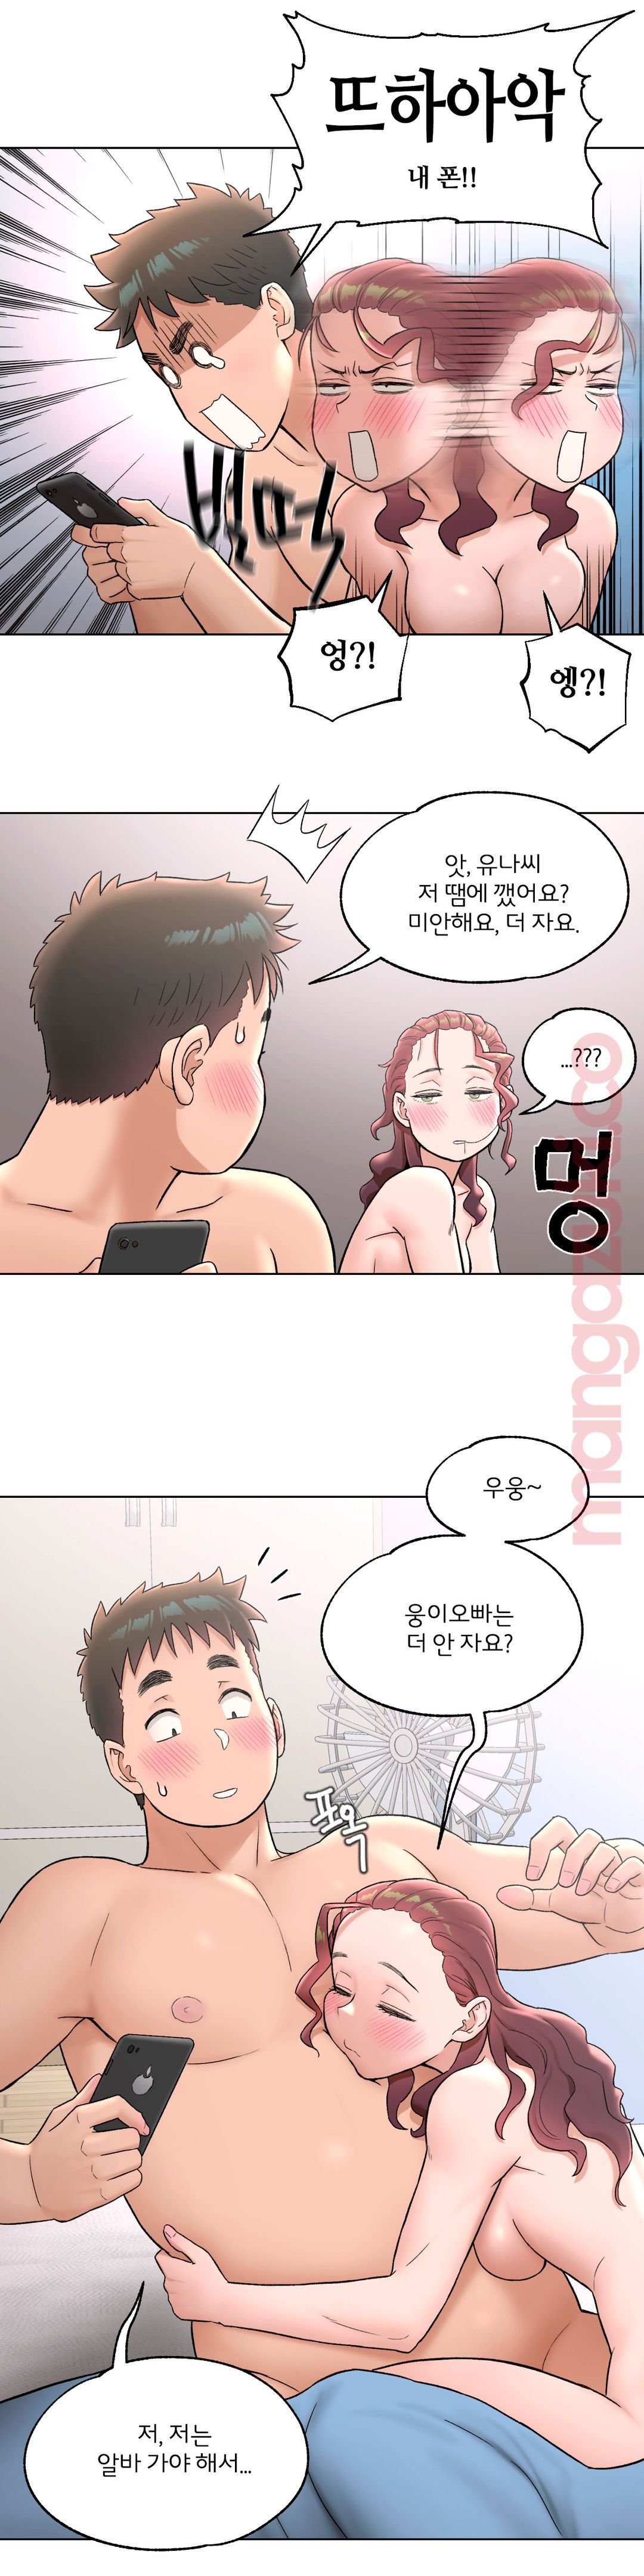 Sexercise Raw - Chapter 62 Page 16